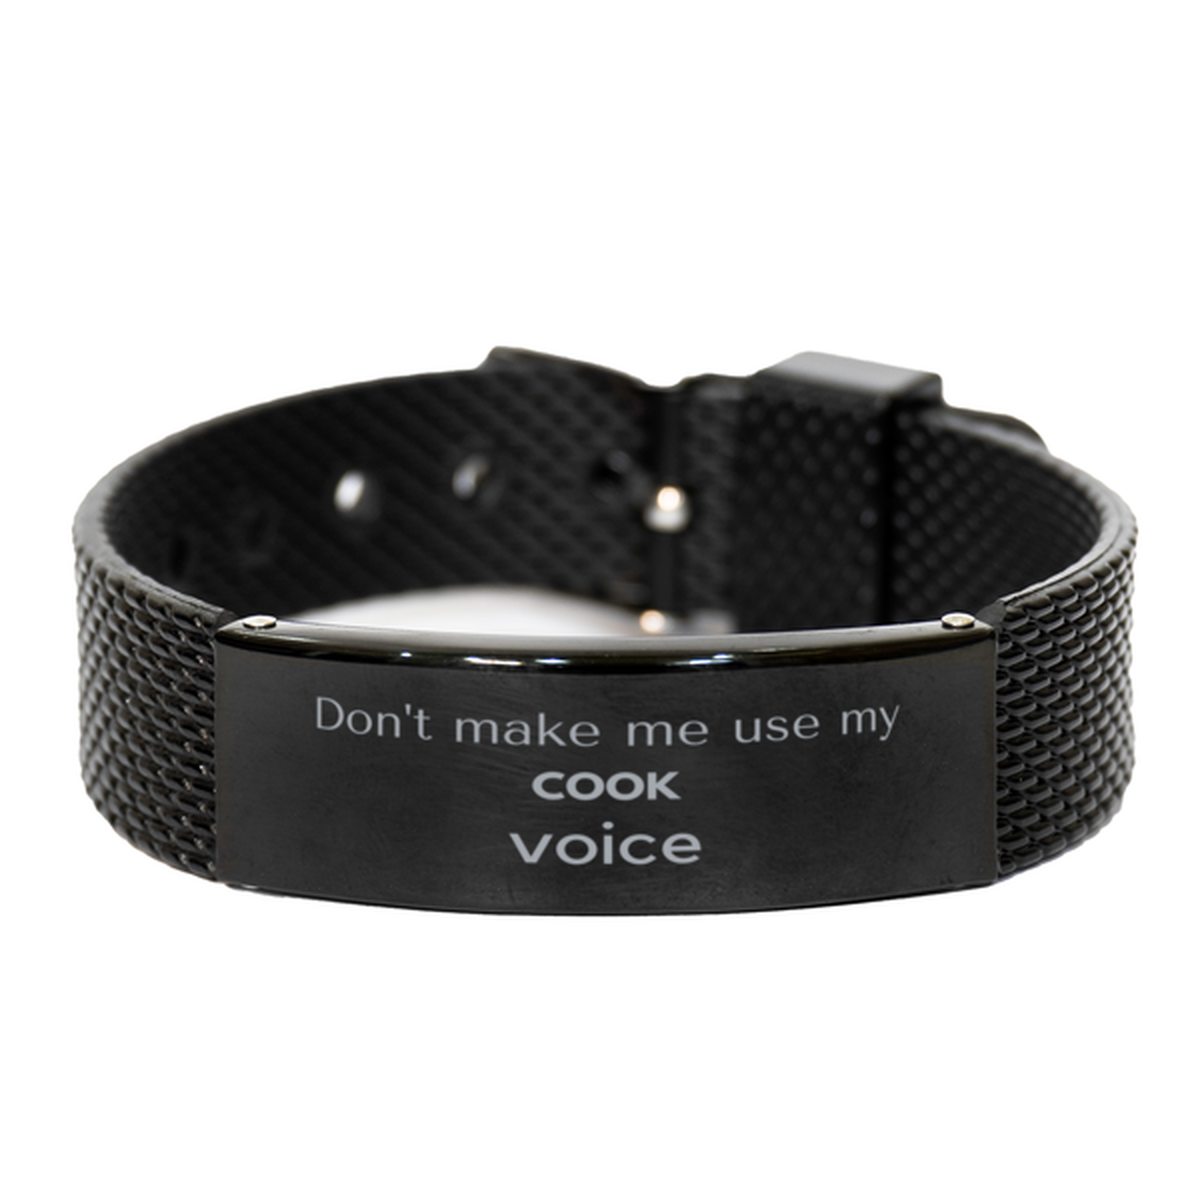 Don't make me use my Cook voice, Sarcasm Cook Gifts, Christmas Cook Black Shark Mesh Bracelet Birthday Unique Gifts For Cook Coworkers, Men, Women, Colleague, Friends